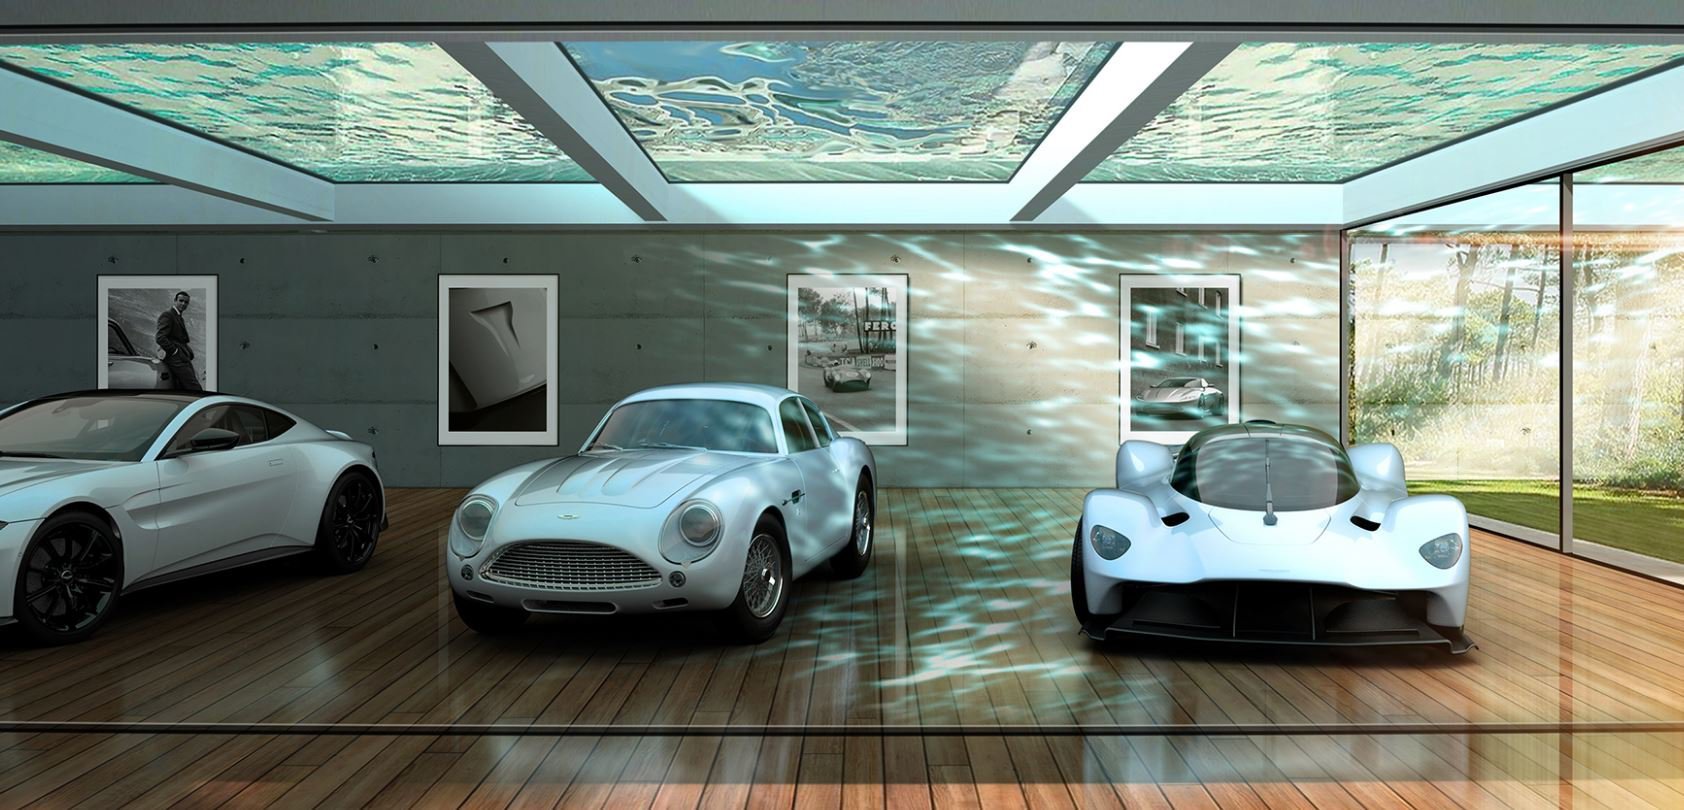 Car in the living room. Incredible luxury garages in the world.